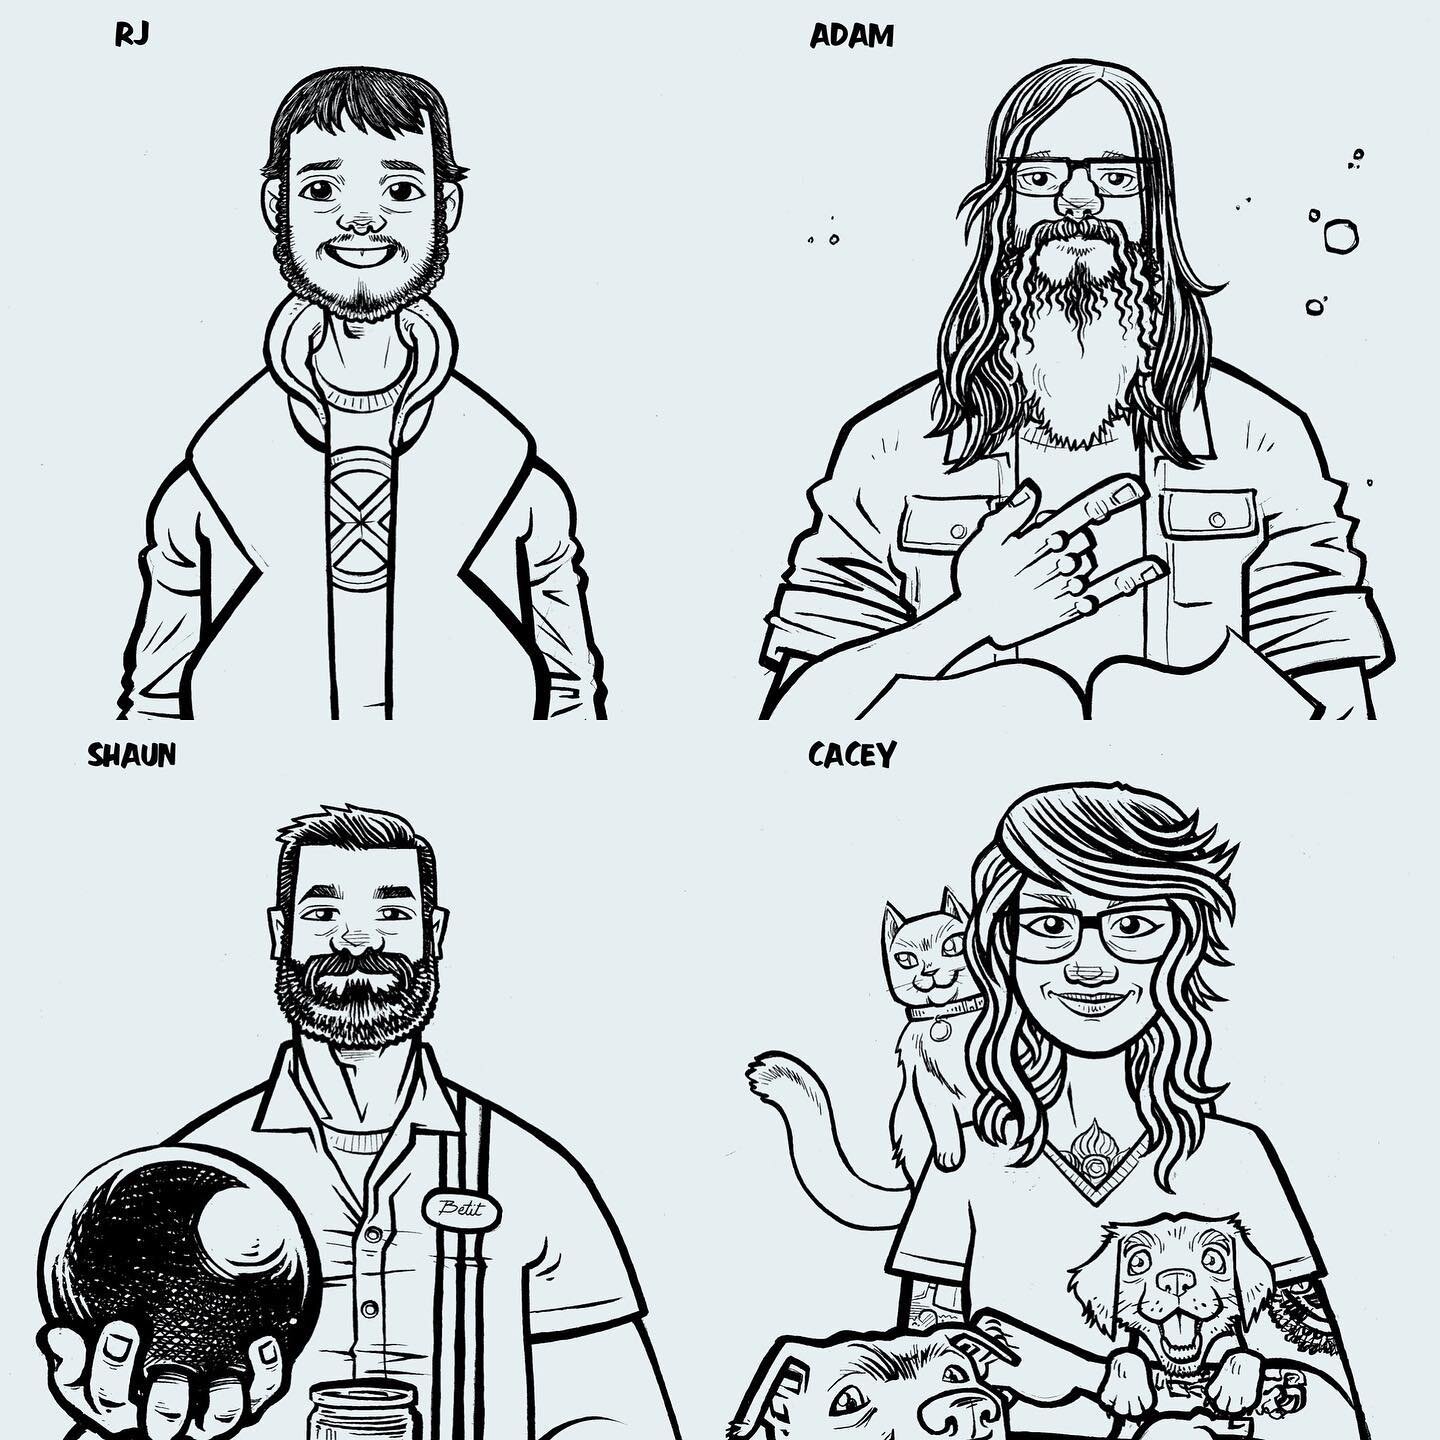 A Batch of portraits for @duelinggenre and there great cast of hosts! 

It&rsquo;s been fun coming up with unique gimmicks for each host that suits them and their geekery.
.
.
.
#thezigzone #protraitillustration #duelinggenreproductions #duelinggenre